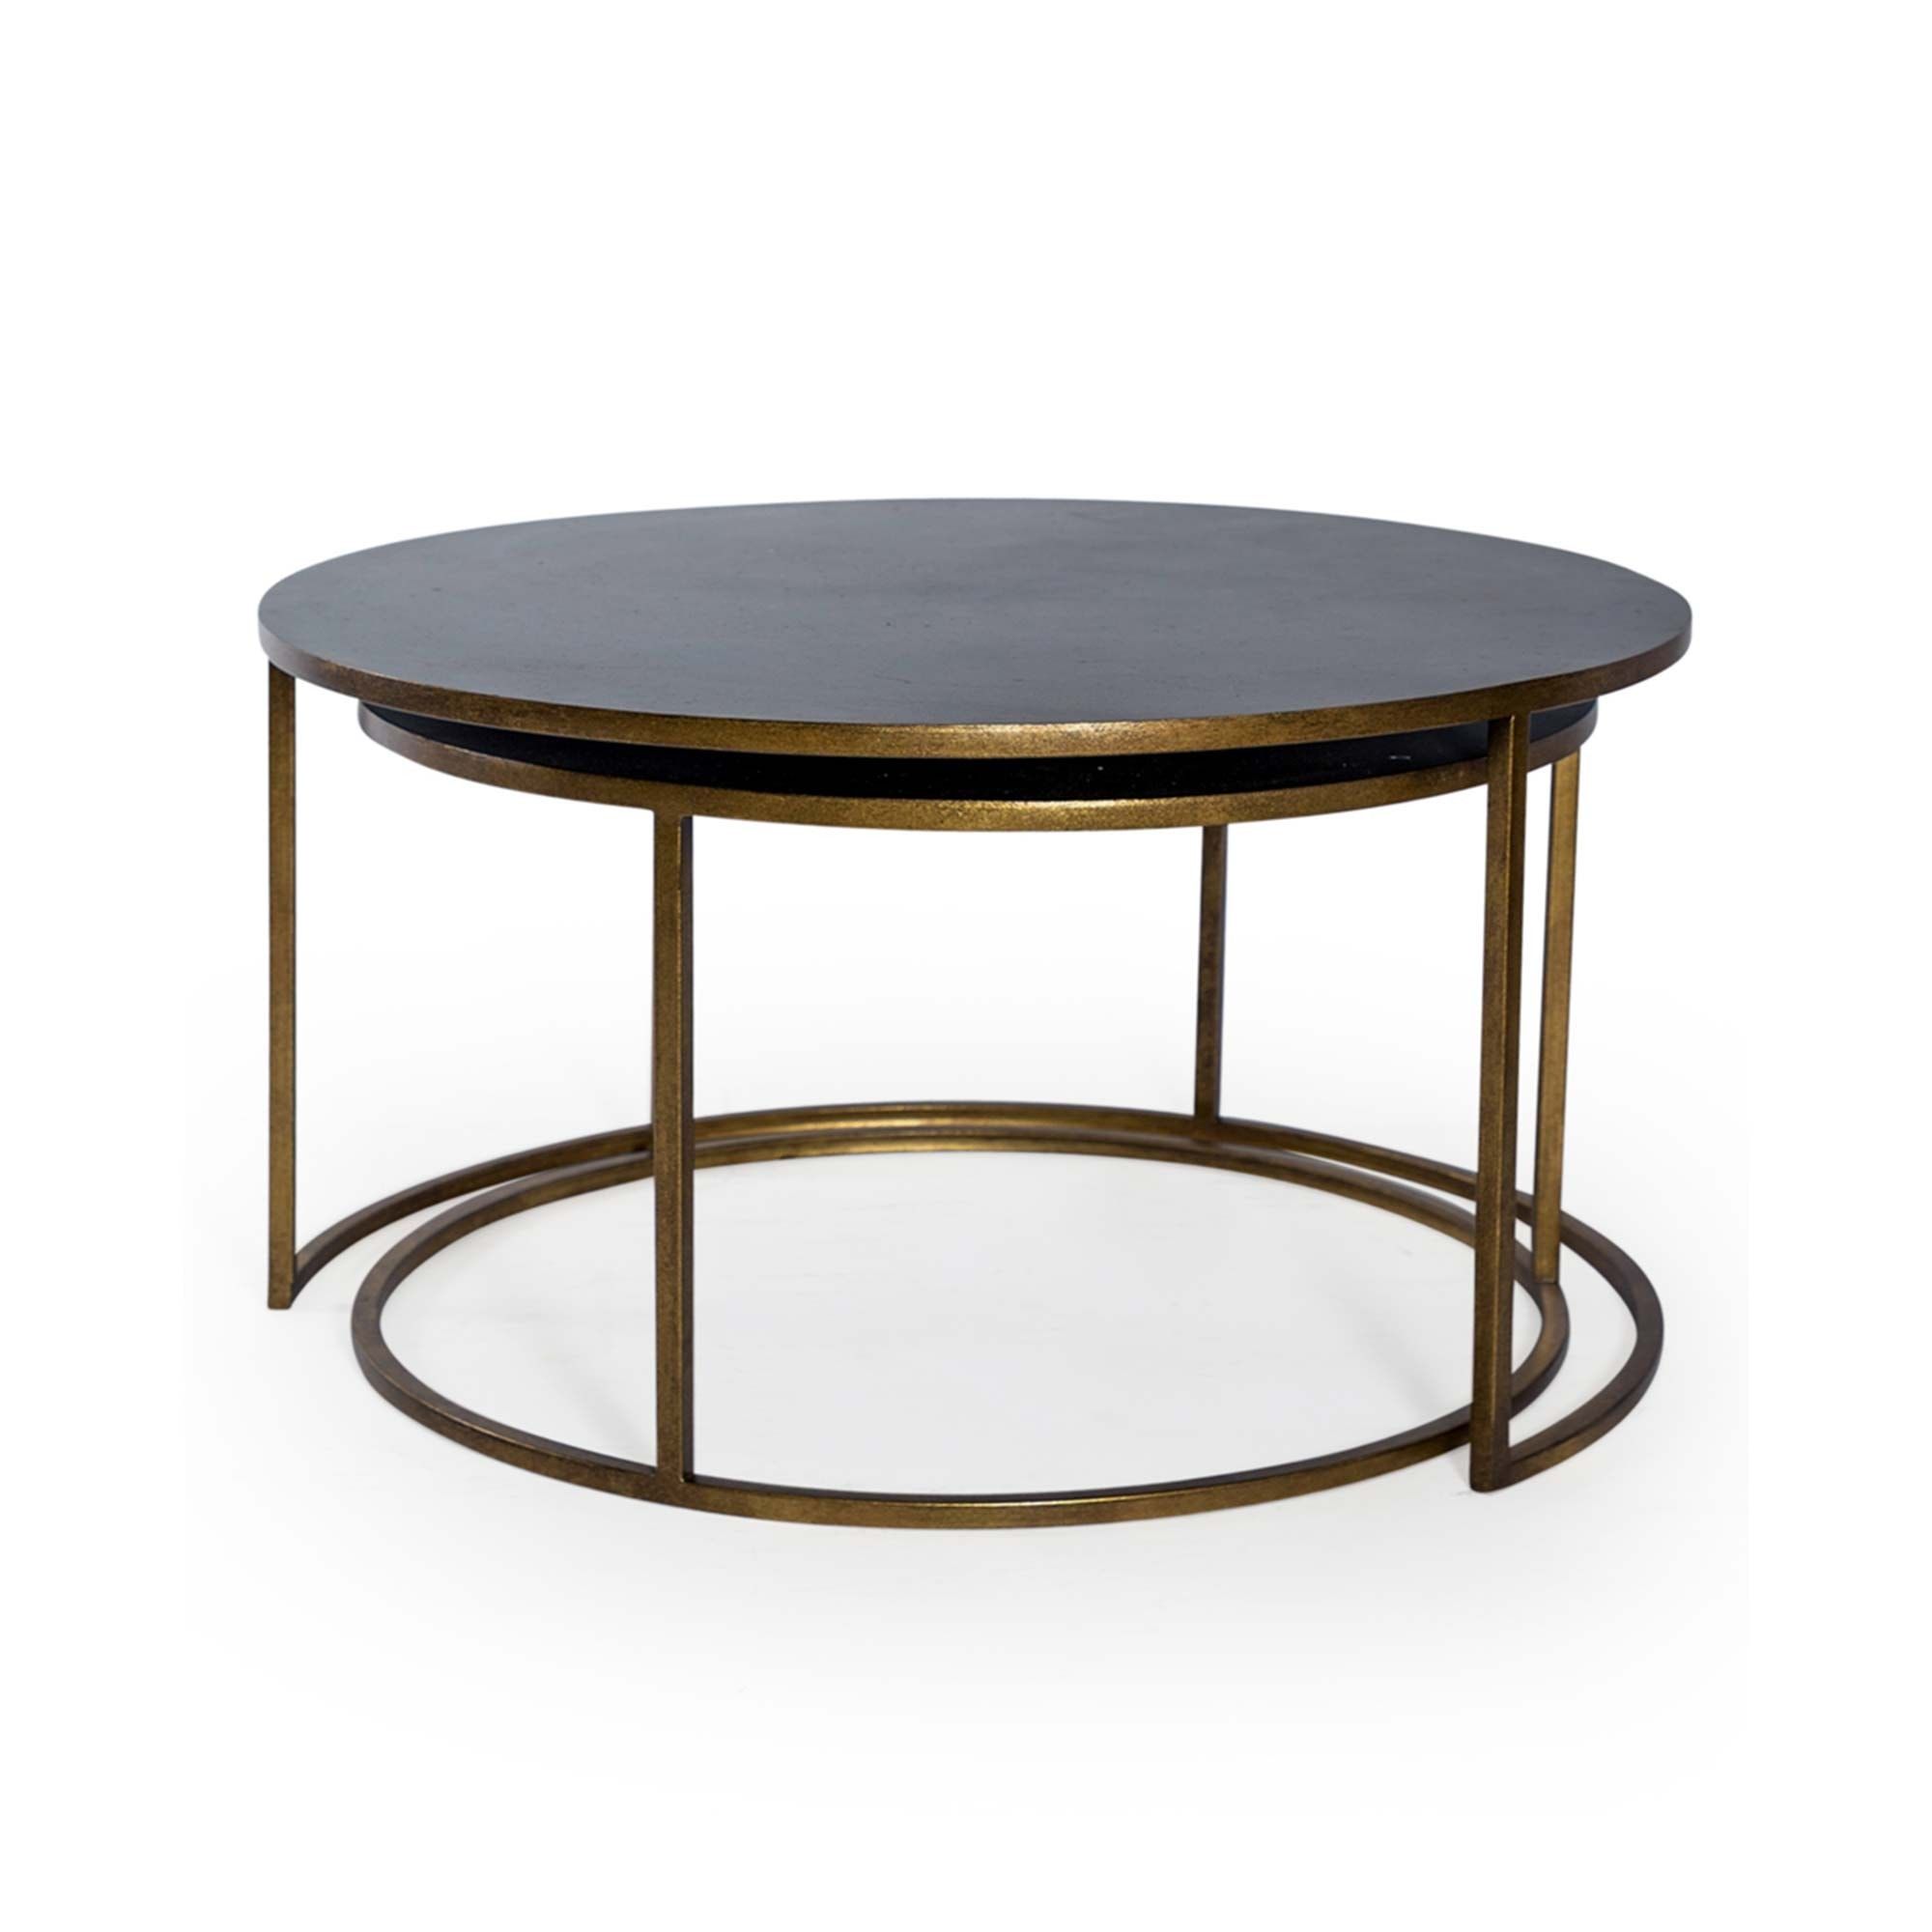 Nest Of 2 Antique Gold And Bronze Metal Coffee Tables | Nest Of Tables Regarding Bronze Metal Coffee Tables (View 5 of 20)